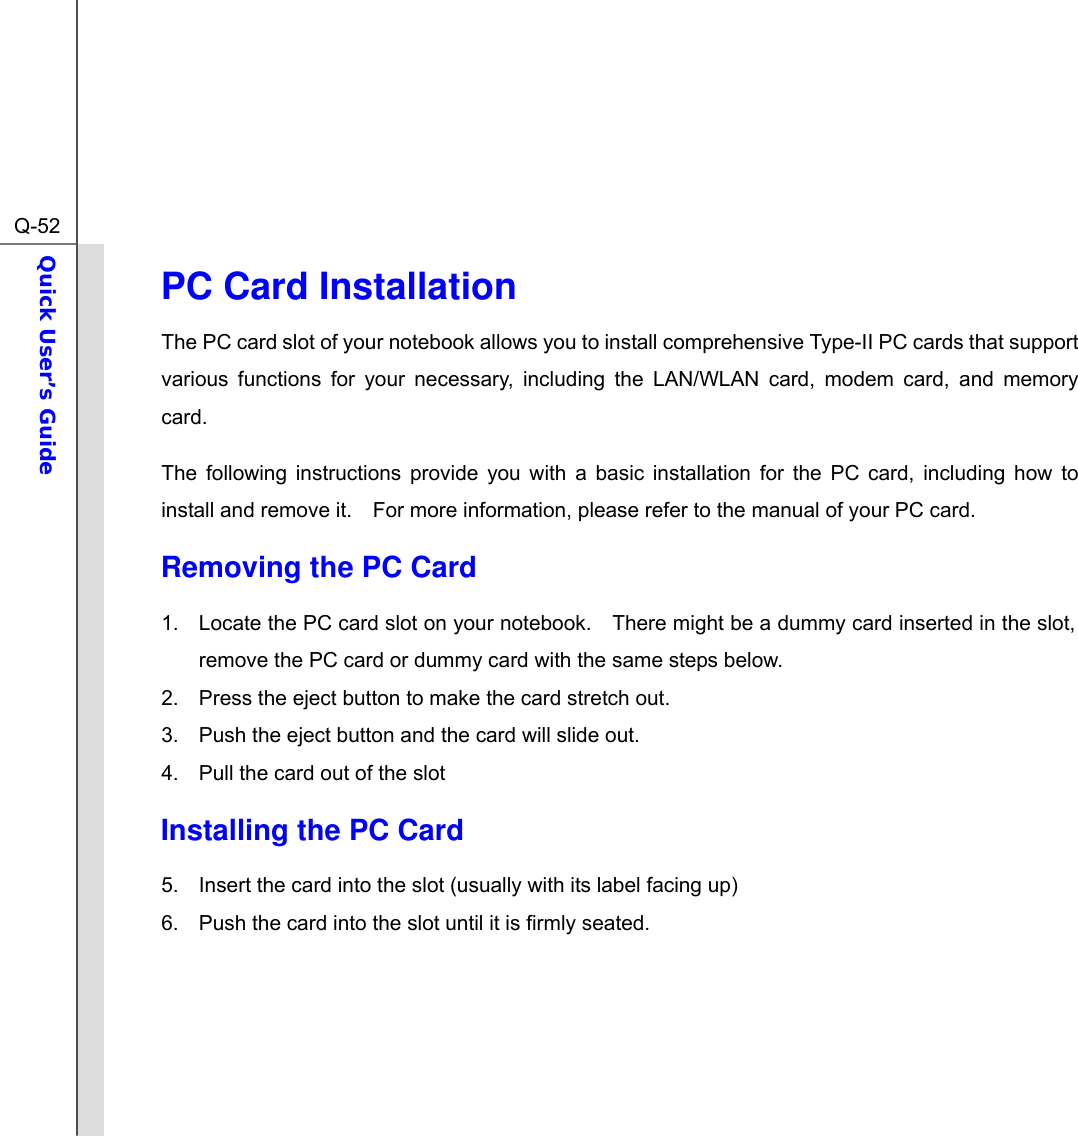  Q-52Quick User’s Guide  PC Card Installation The PC card slot of your notebook allows you to install comprehensive Type-II PC cards that support various functions for your necessary, including the LAN/WLAN card, modem card, and memory card. The following instructions provide you with a basic installation for the PC card, including how to install and remove it.    For more information, please refer to the manual of your PC card. Removing the PC Card  1.  Locate the PC card slot on your notebook.    There might be a dummy card inserted in the slot, remove the PC card or dummy card with the same steps below. 2.  Press the eject button to make the card stretch out. 3.  Push the eject button and the card will slide out.     4.  Pull the card out of the slot Installing the PC Card 5.  Insert the card into the slot (usually with its label facing up)   6.  Push the card into the slot until it is firmly seated.      